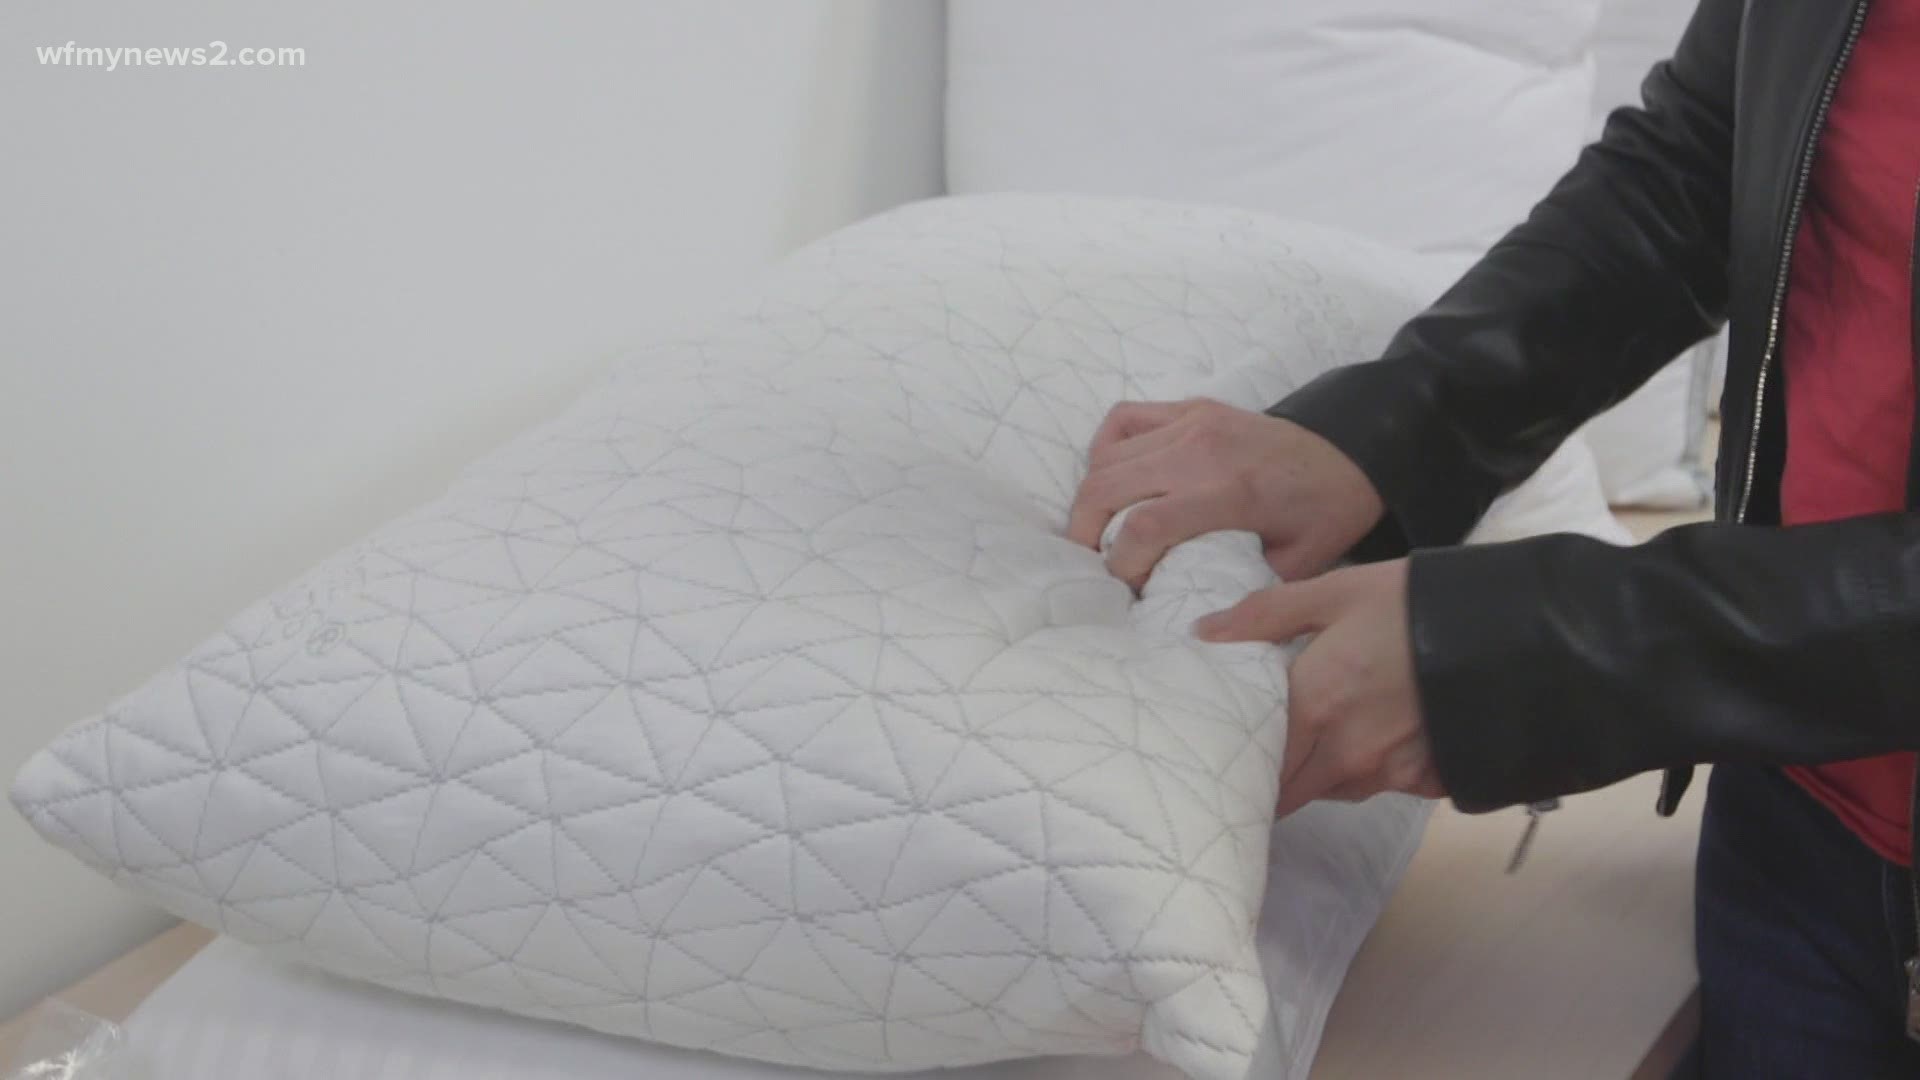 Start with fluffing your pillow every day to get rid of dust and restore its shape.